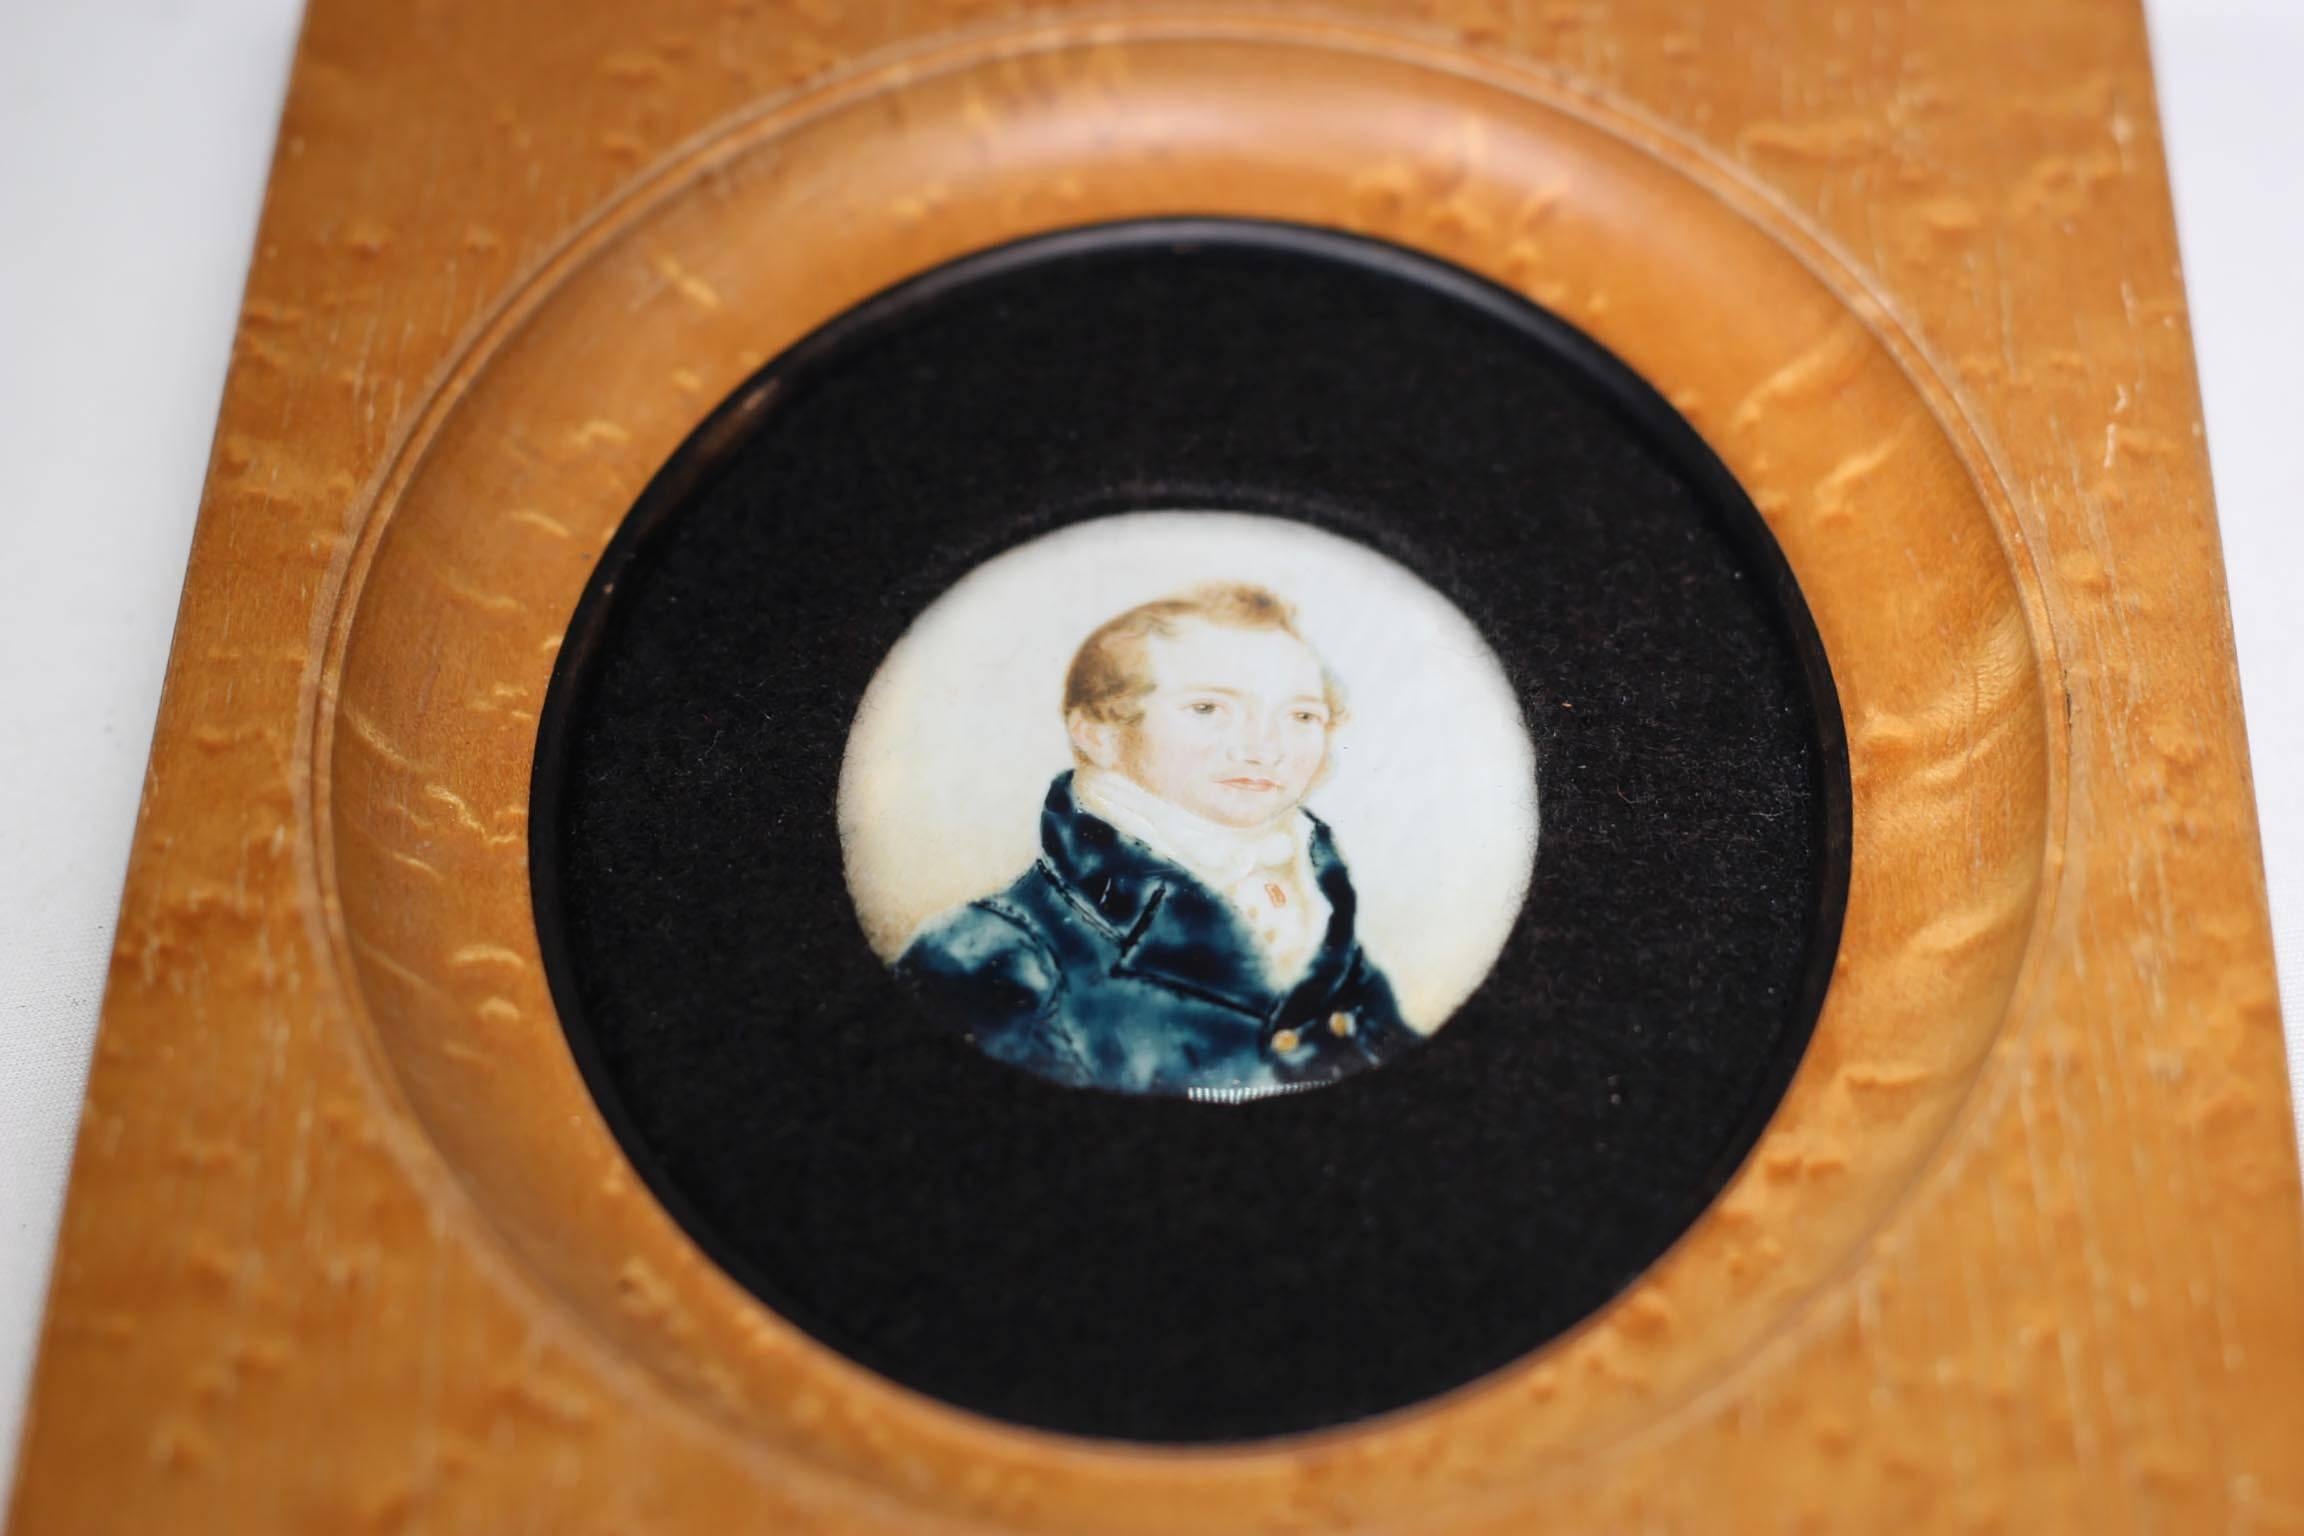 Early 19th century miniature portrait porcelain painting, Regency period. Frame appears to be newer.